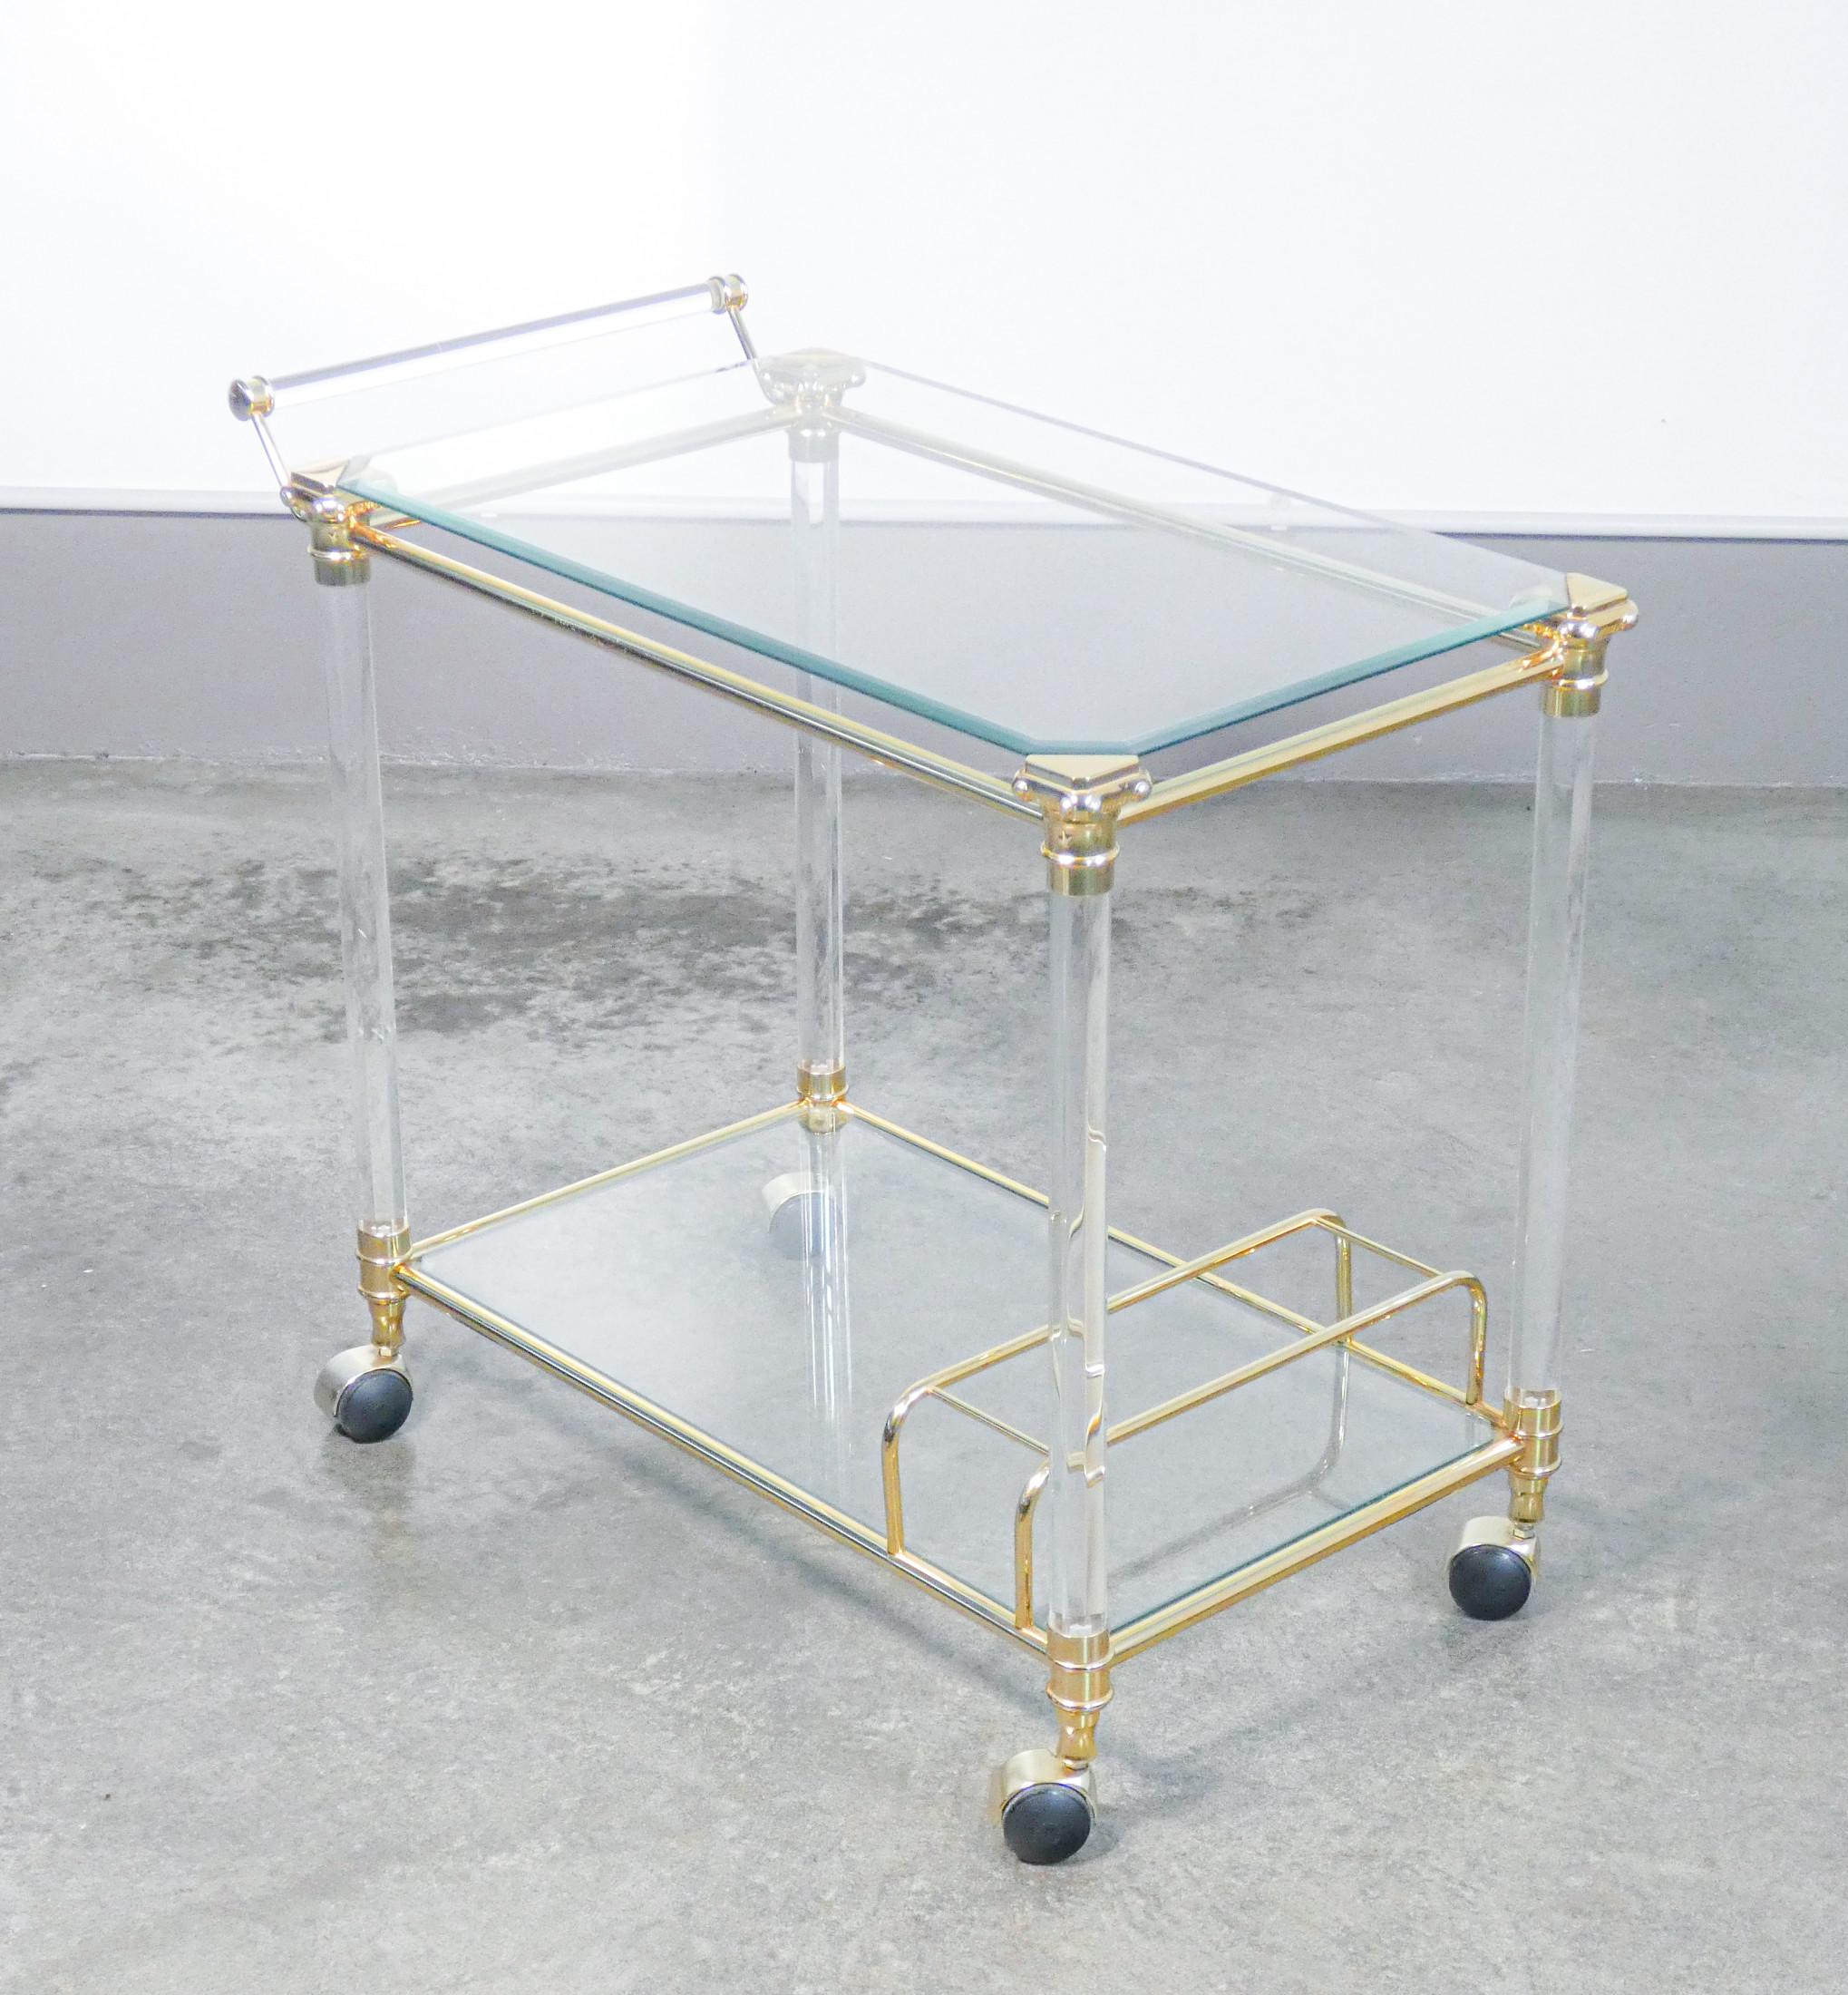 Hollywood Regency design
servign trolley,
in gilded metal, glass and plexi

Period
70s / 80s

Template
Serving trolley with wheels and two shelves

Materials
Golden metal, glass tops, columns and handle in plexi

Dimensions
Top 70 x 44